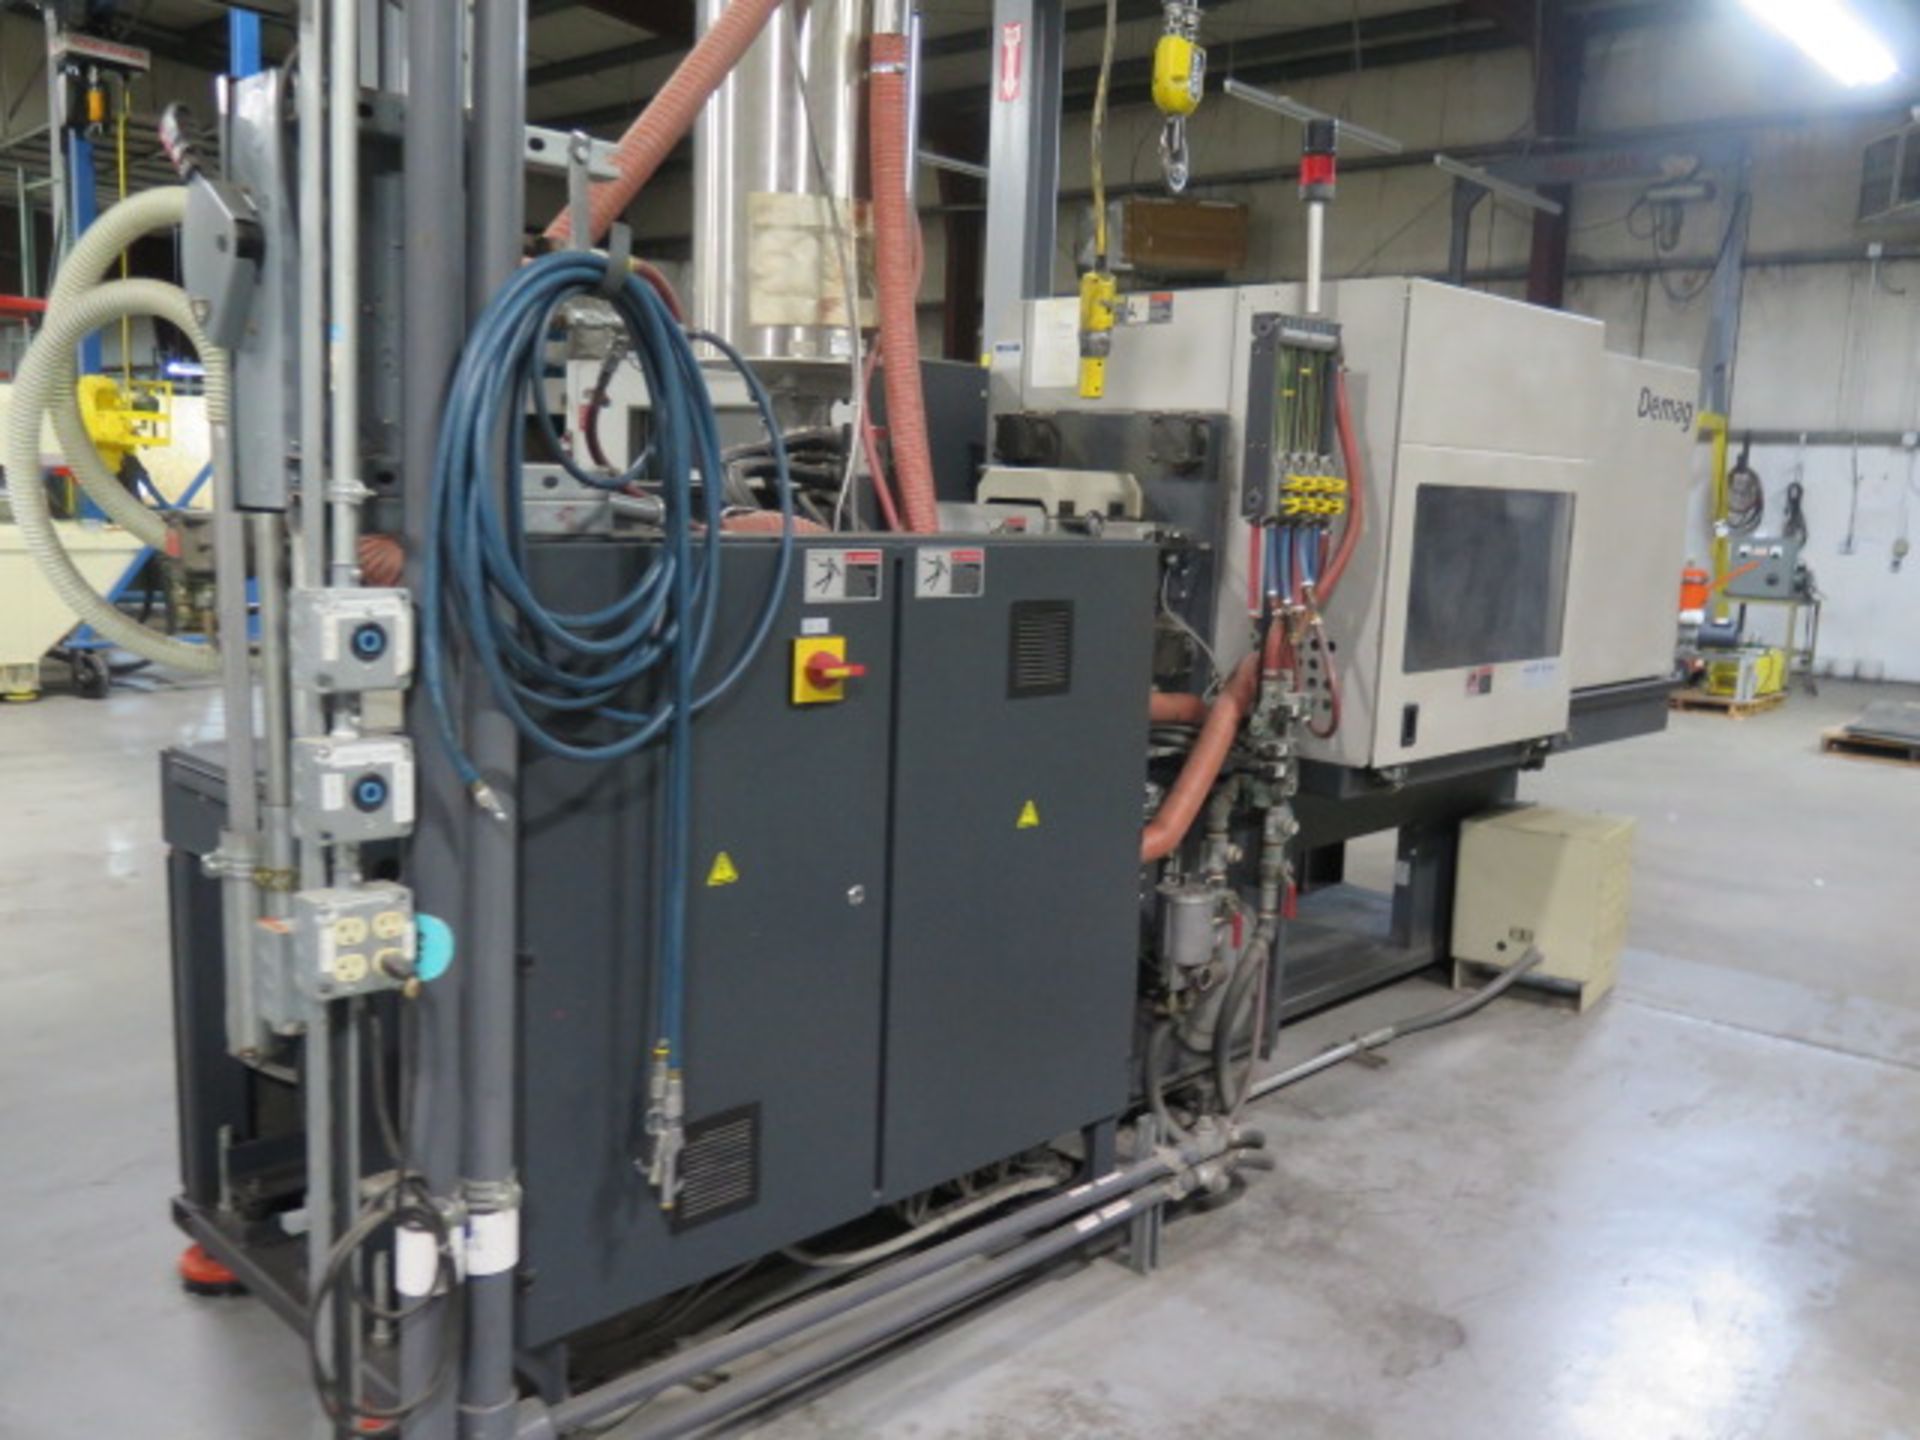 Demag Ergotech 800/420-200 80-Ton Plastic Injection Molding s/n 7153-0016 w/ Demag NC4, SOLD AS IS - Image 18 of 20